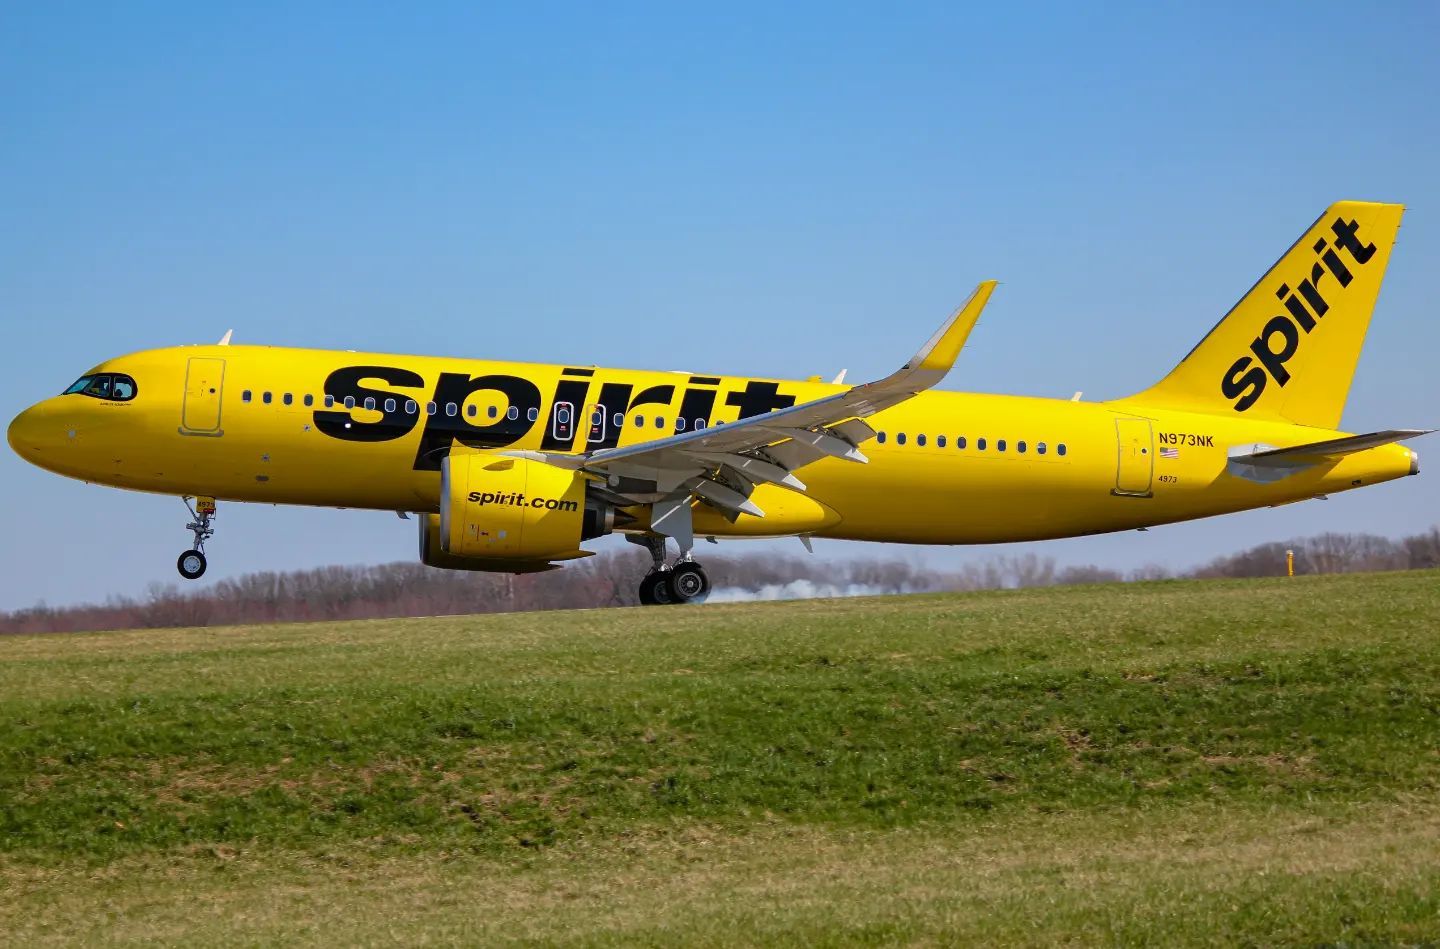 A Spirit Airlines aircraft as it lands on the runway.